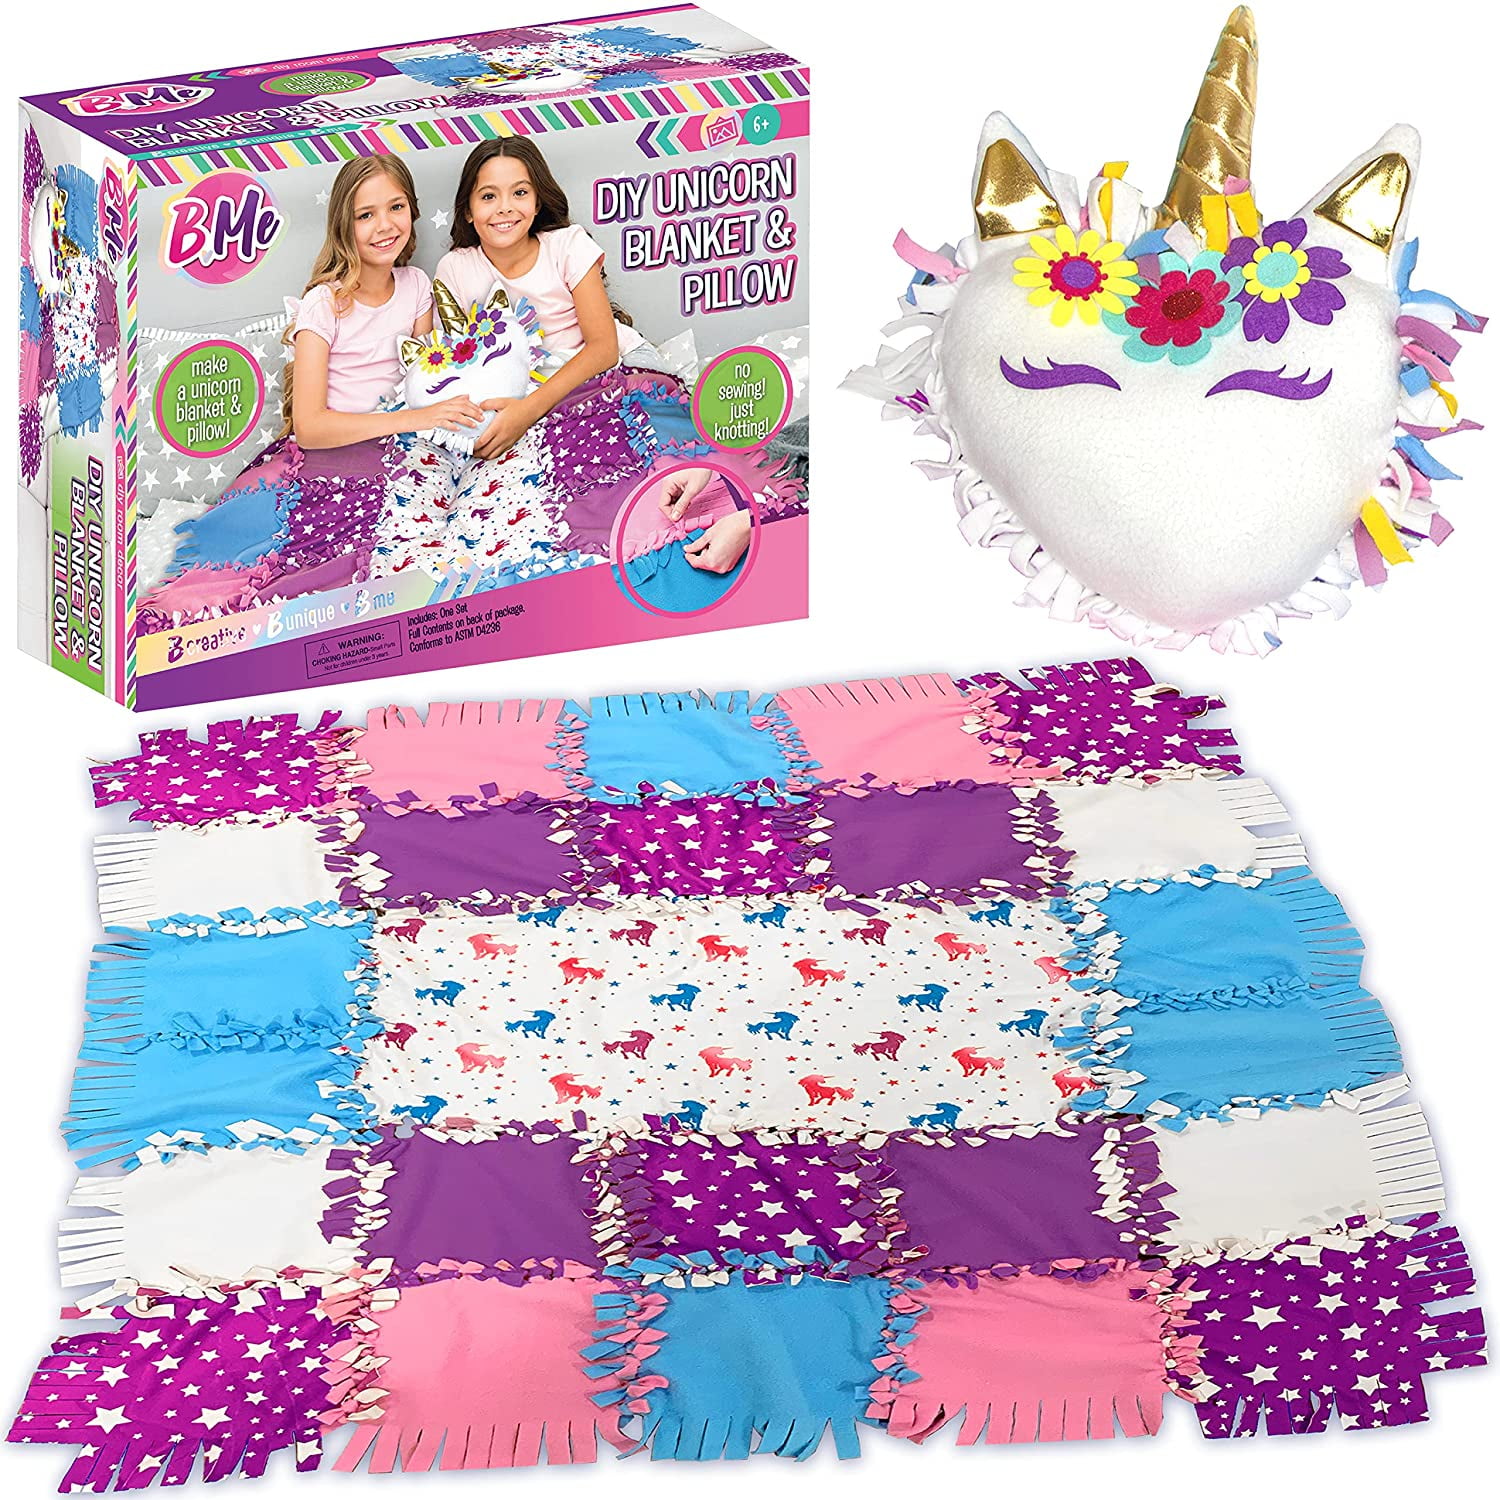 DIY 2-in-1 Unicorn Knot No Sew Blanket Pillow, Craft for Girls, Make Your Own, Plush Fleece Blankets and Pillows Quilt Set for Kids, Birthday Activity